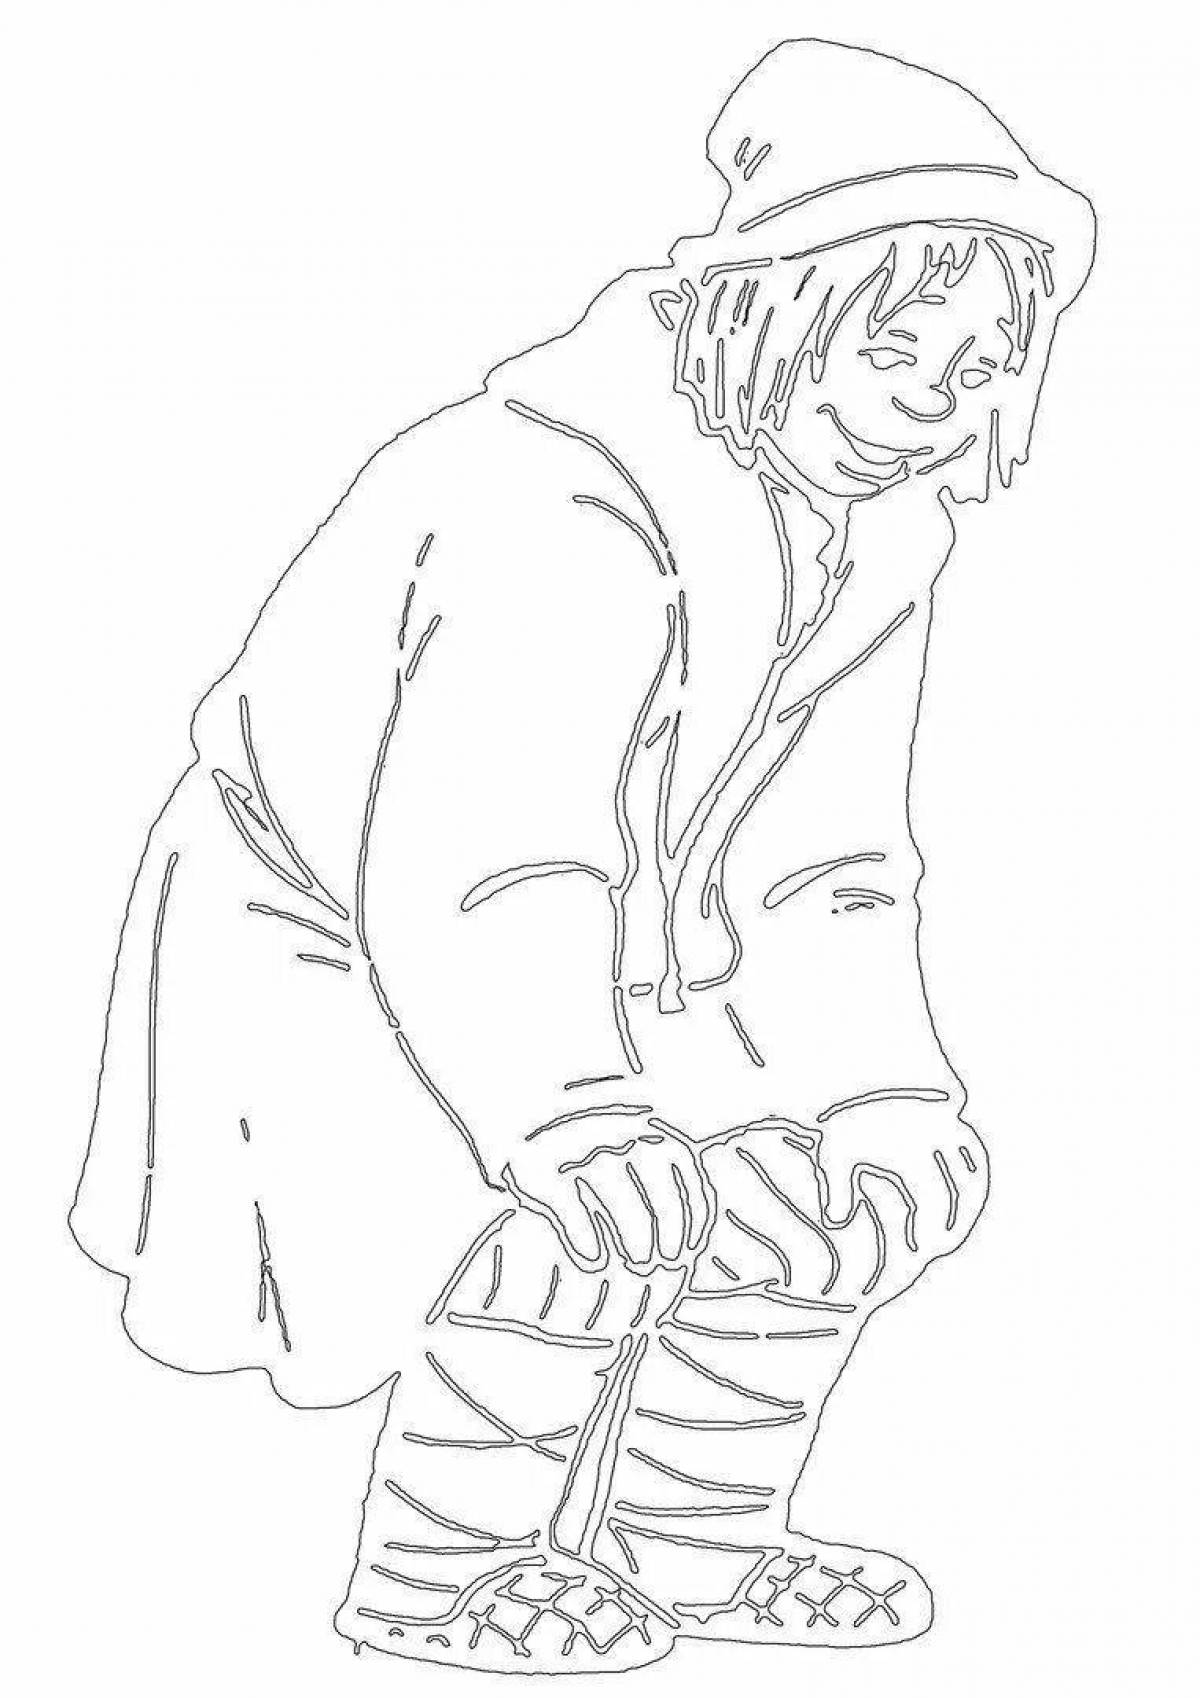 Coloring page captivating Ivan the Fool